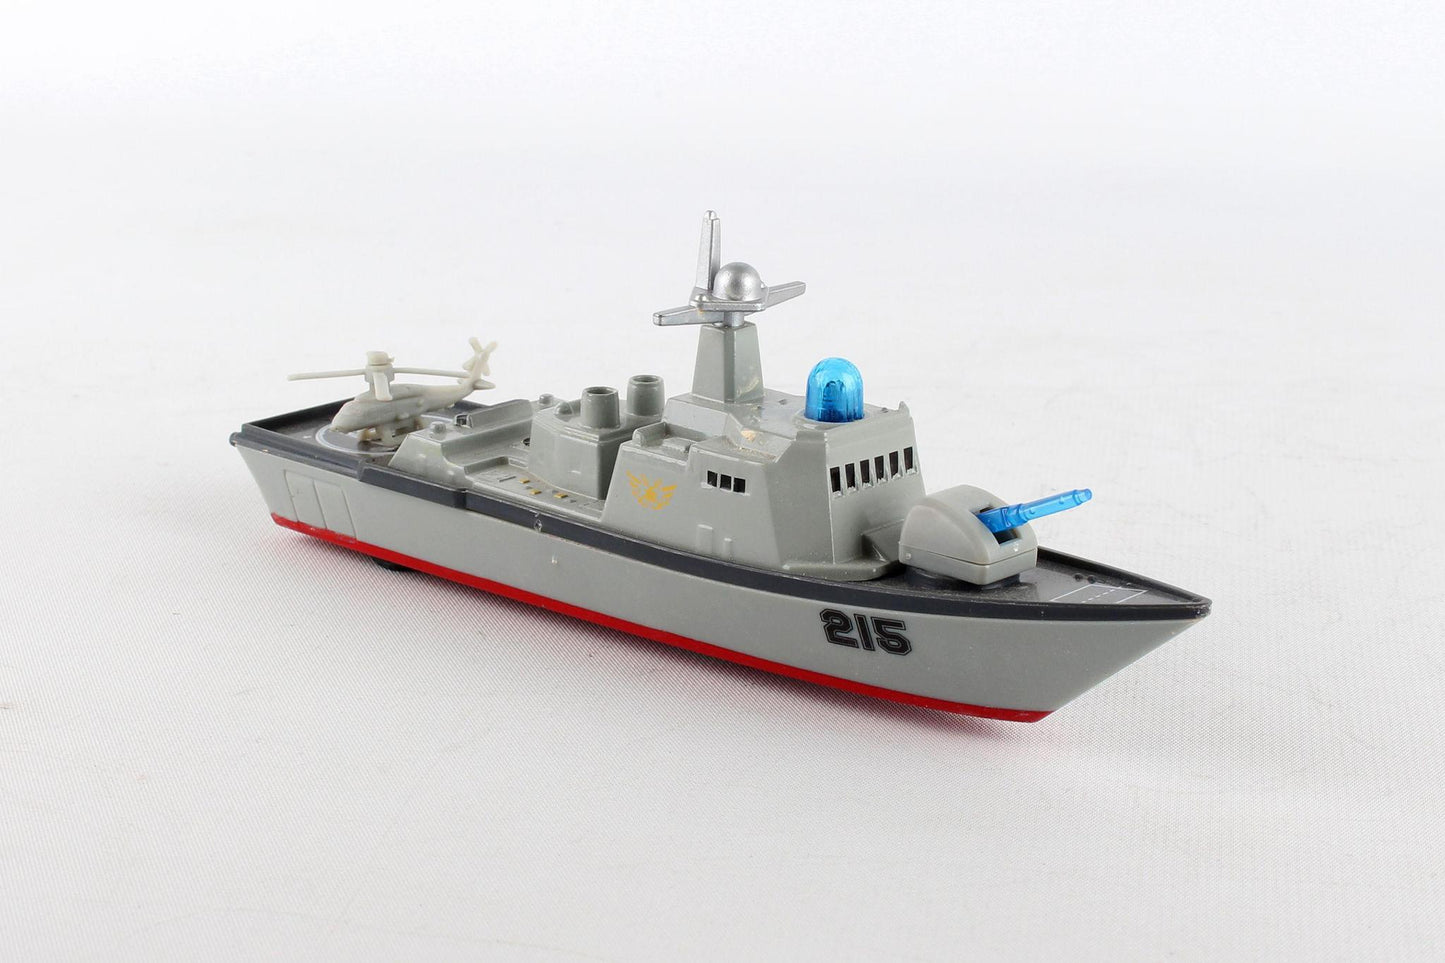 Diecast Military PMT1602 Battleship Aircraft Carrier Pullback Vehicle Model Warship Toy with Sound & Lights